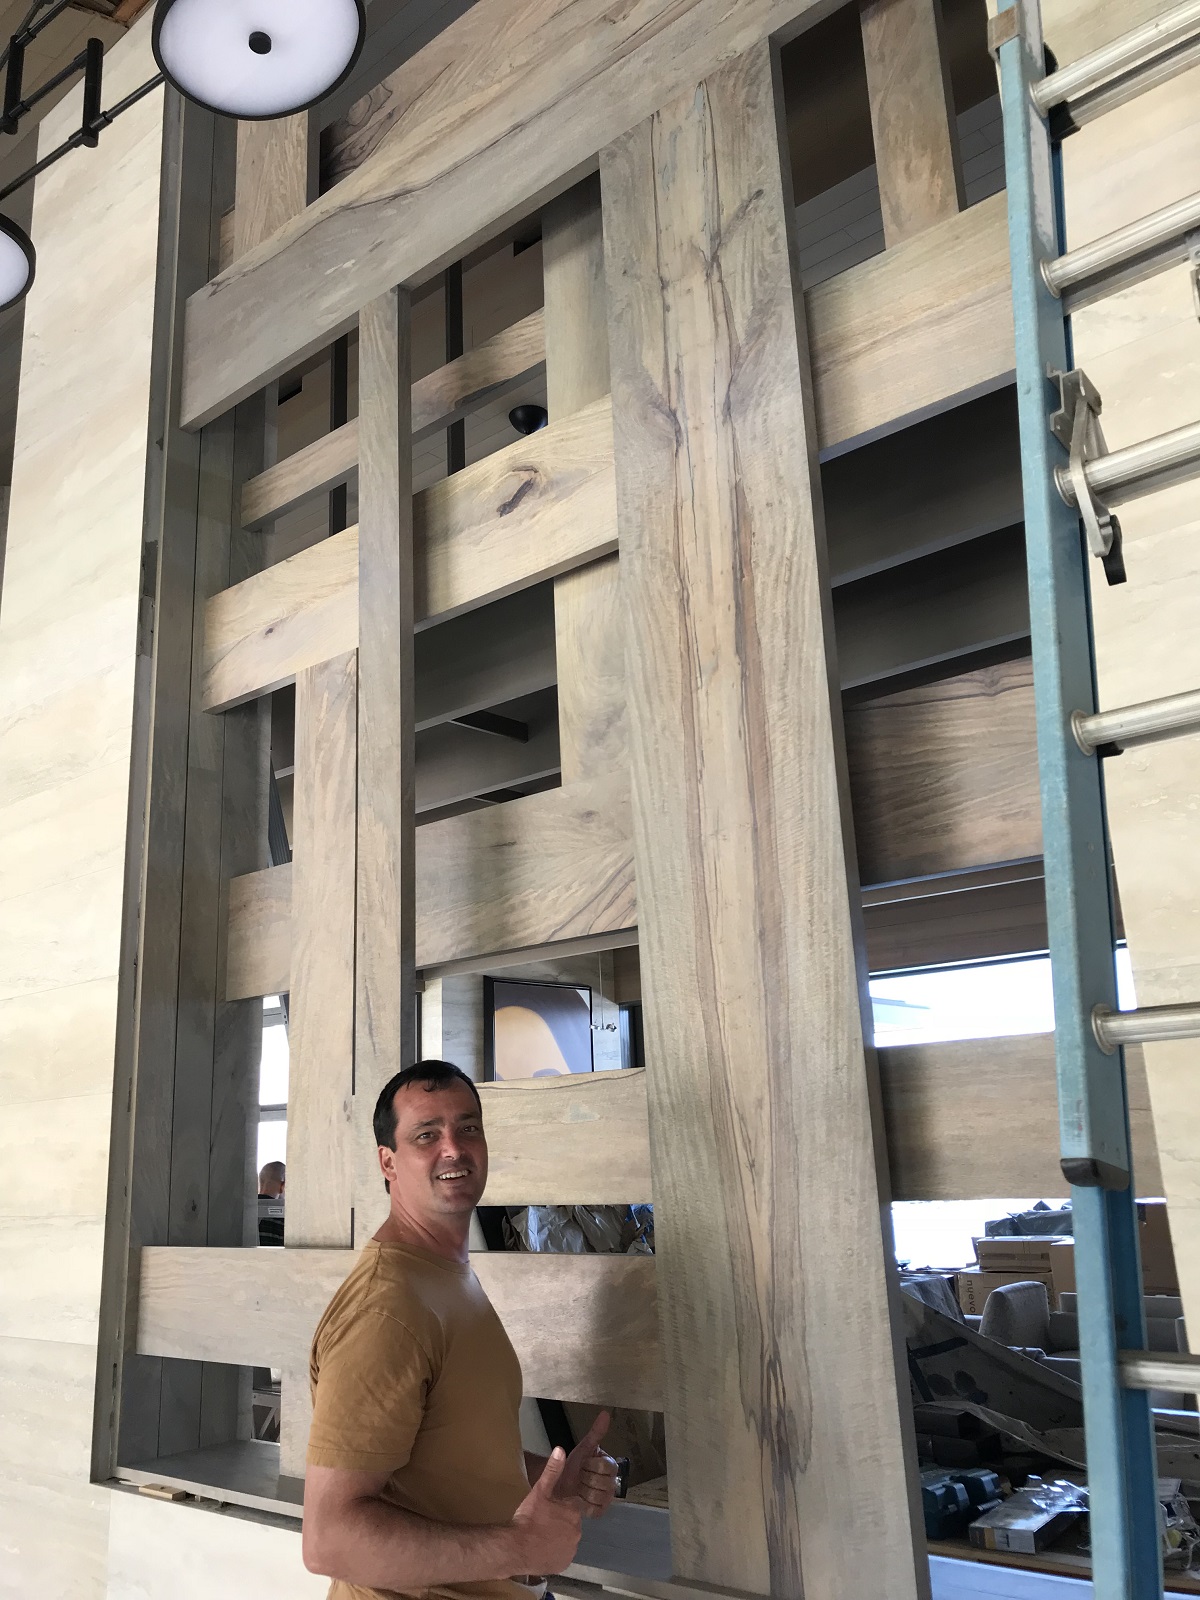 Robert standing close to a wooden structure